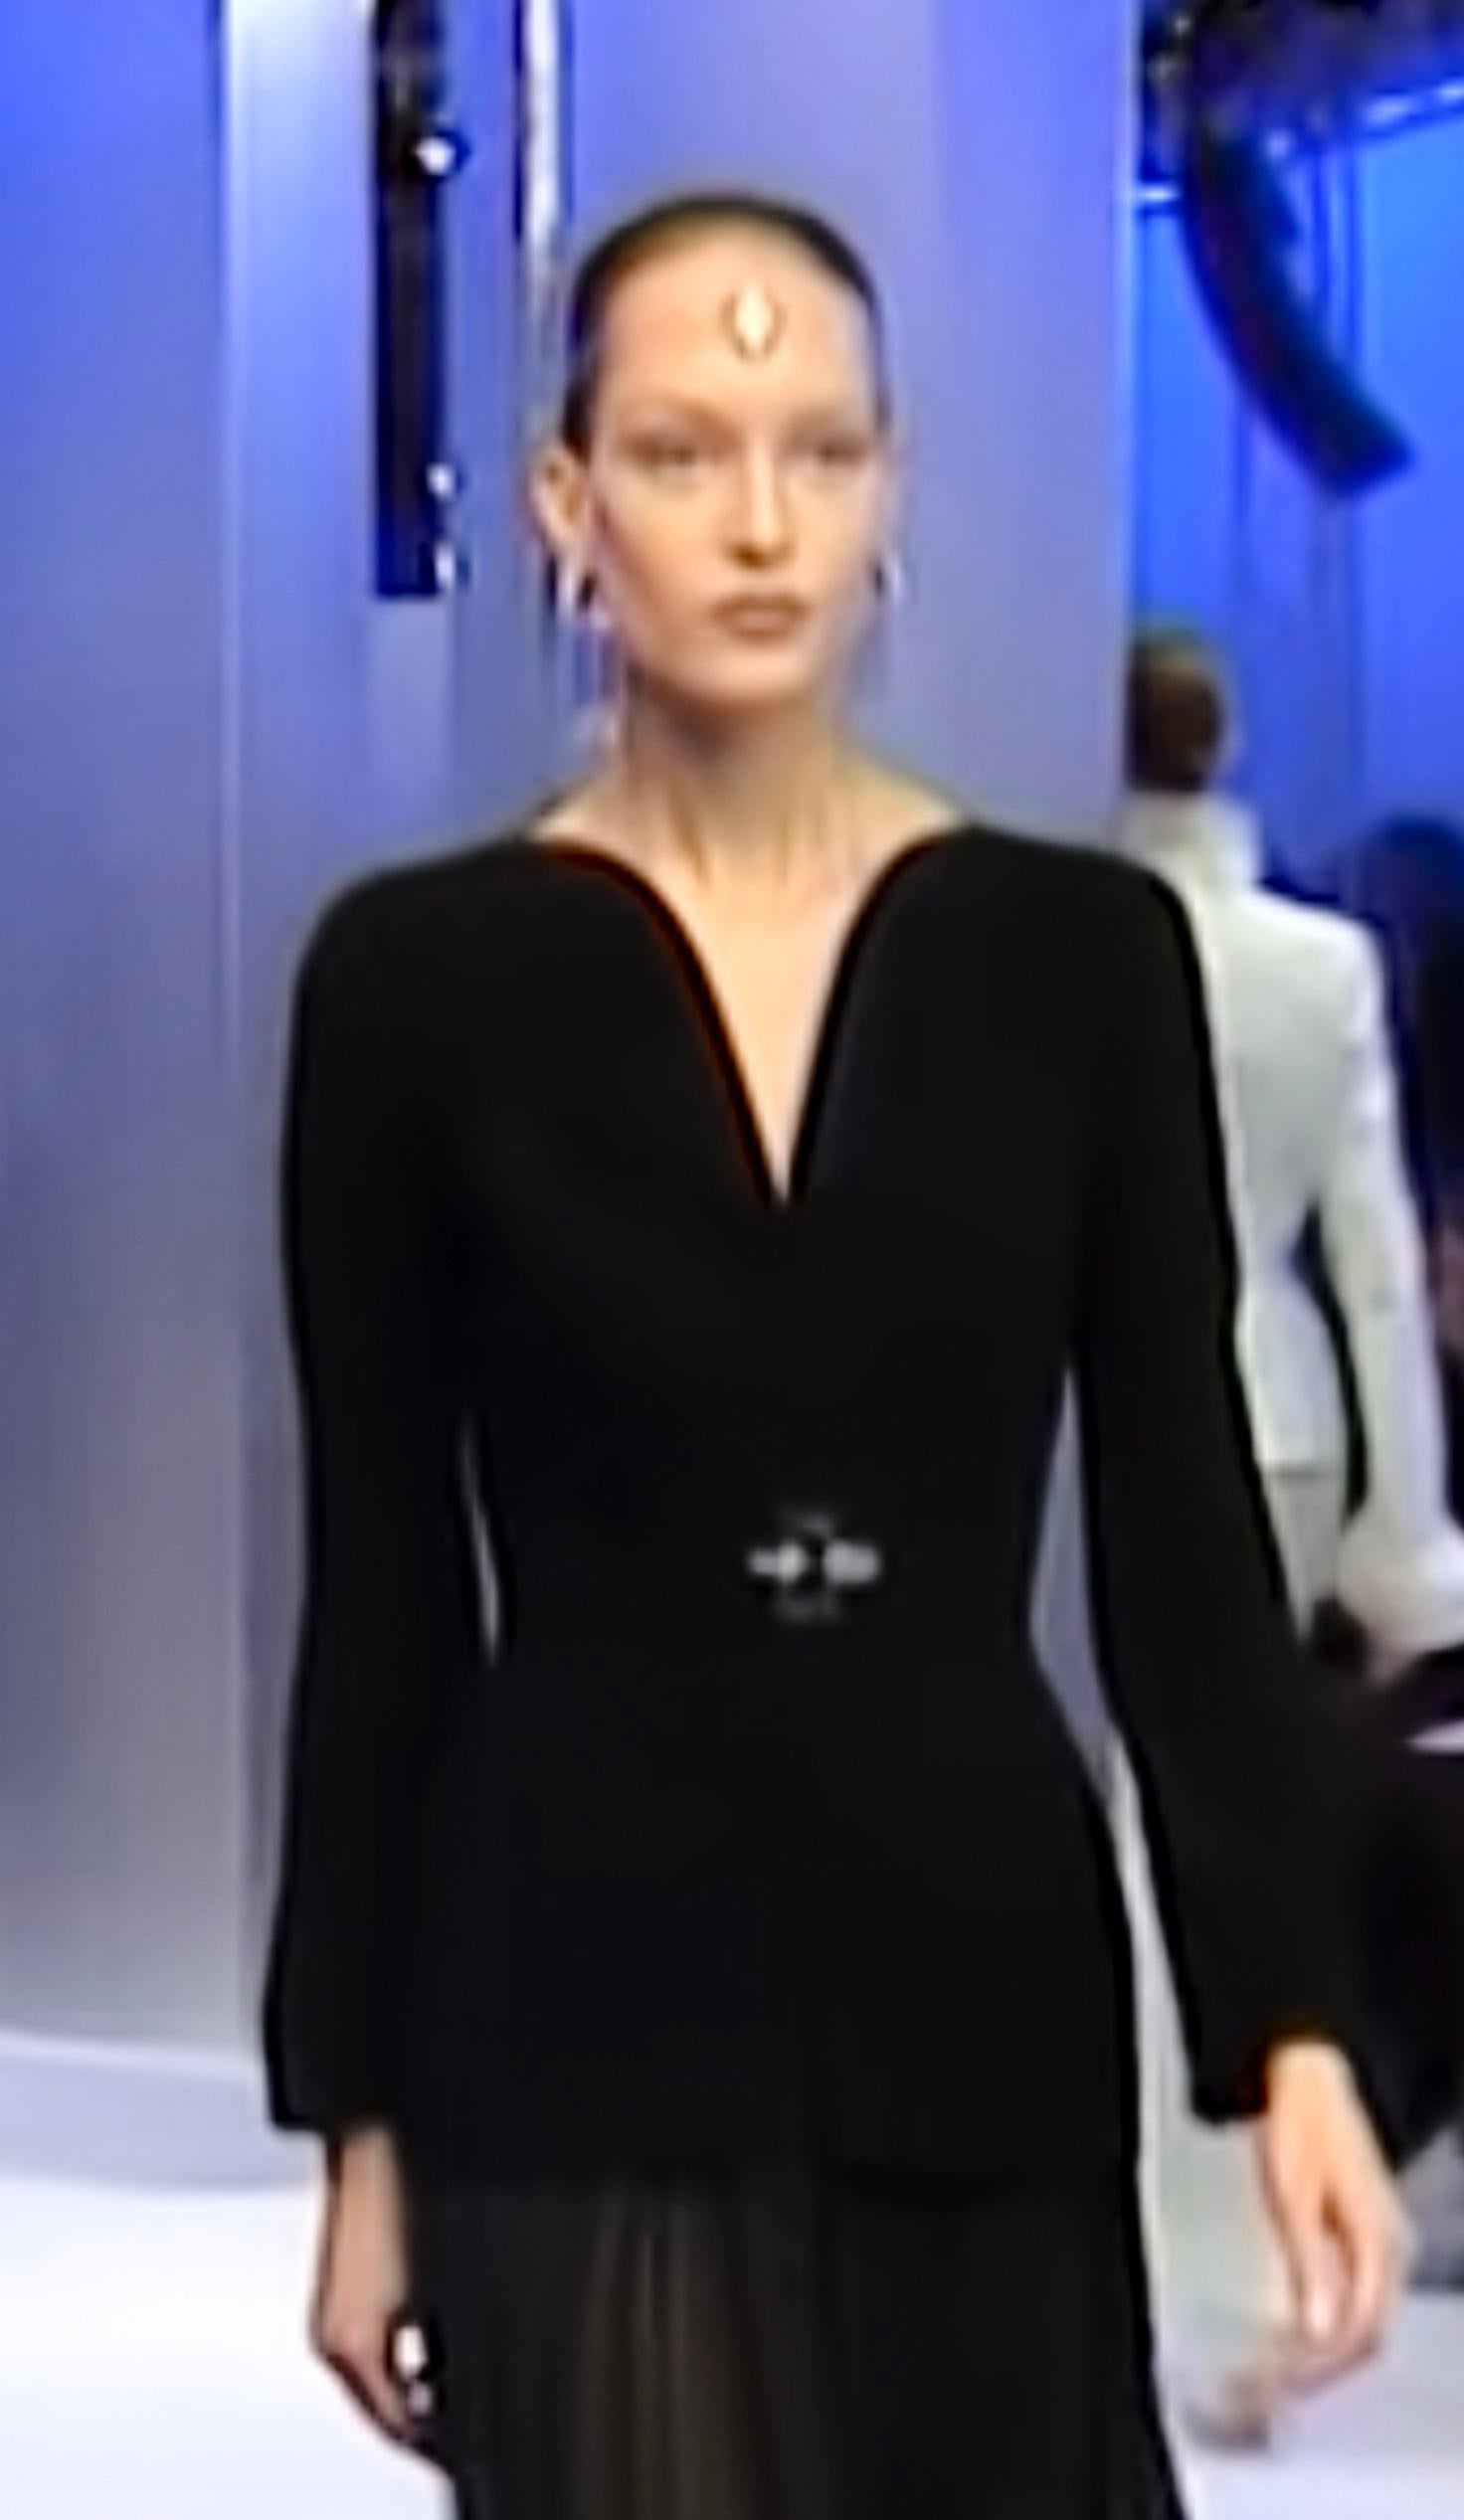 
Rare Thierry Mugler Ensemble, documented featured on the Runway, Fahsionshow 2000
Black two piece skirtsuit, jacket/blazer and skirt. Gorgeous deep V-neck and fabulous sculptured tailoring. Fitted feminine silhouette - a stunning combination of